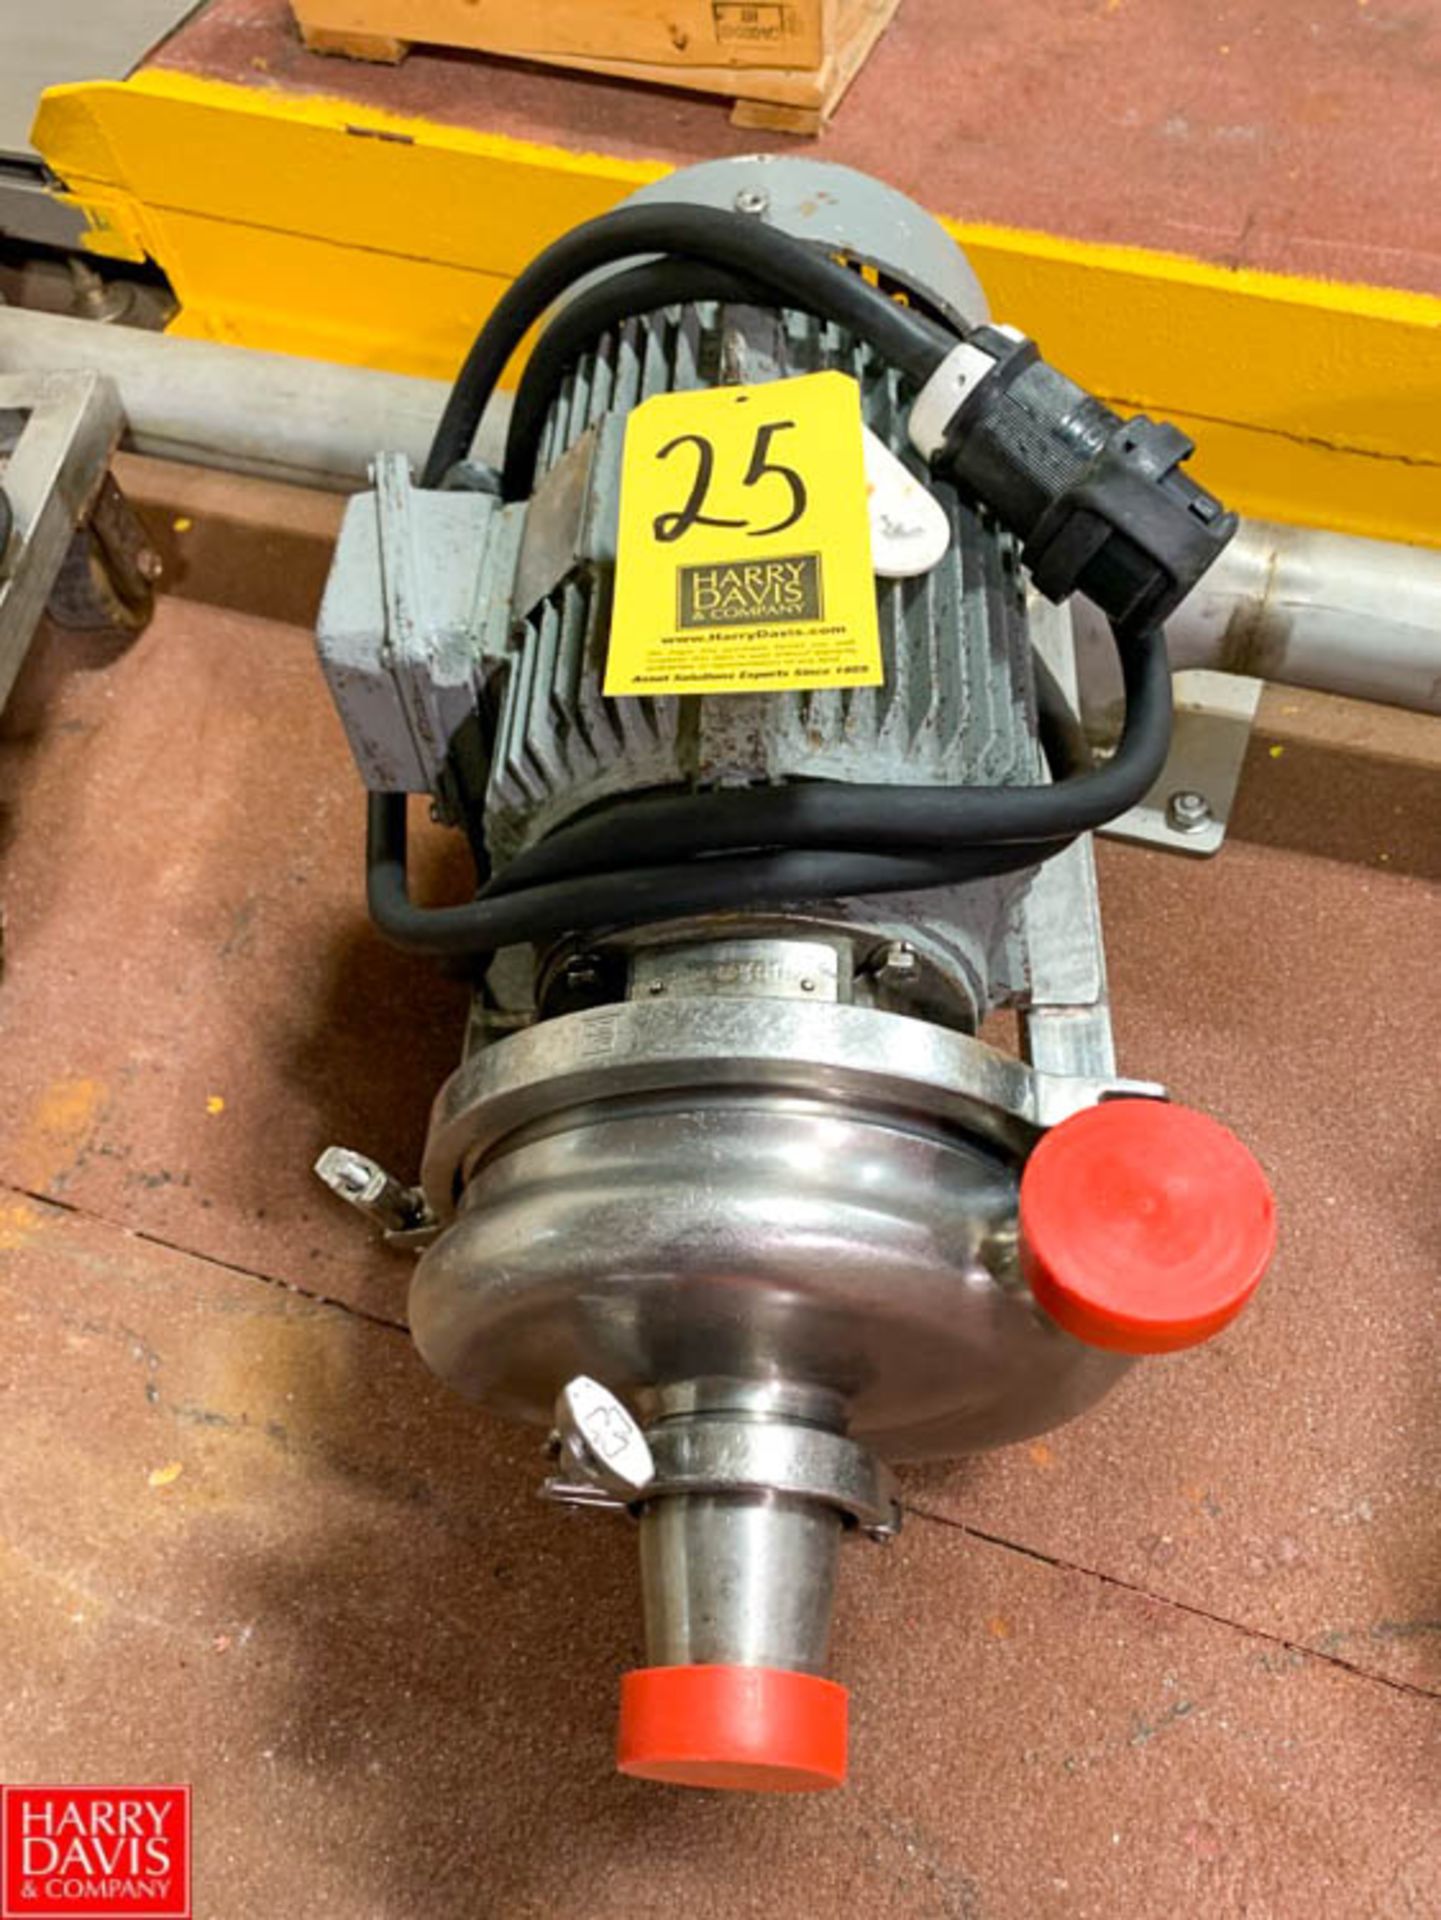 WCB 5 HP Centrifugal Pump with 2" x 2" S/S Head Rigging Fee: $35